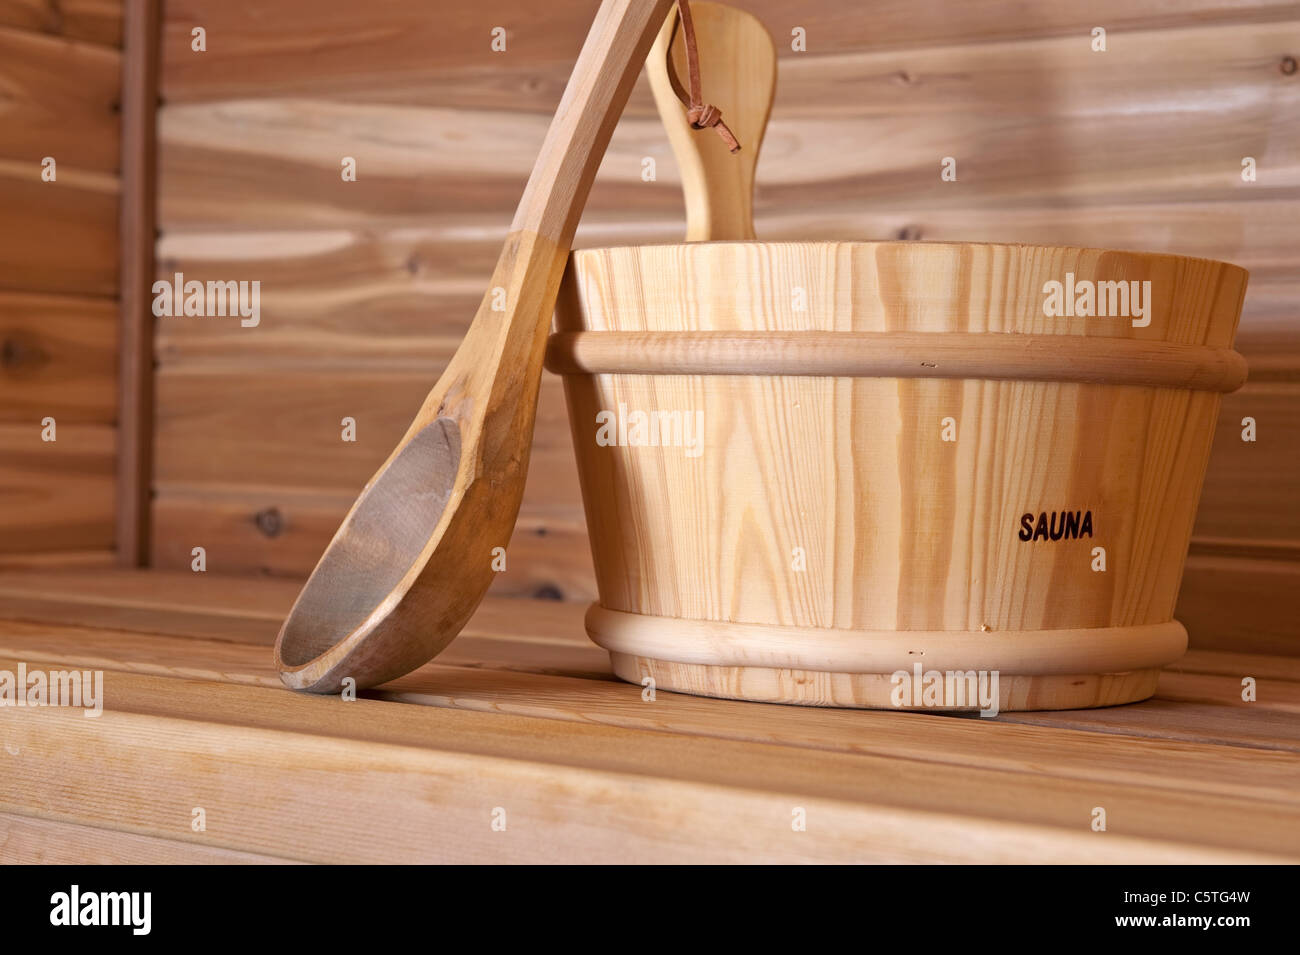 wooden bucket and ladle within a hot sauna Stock Photo